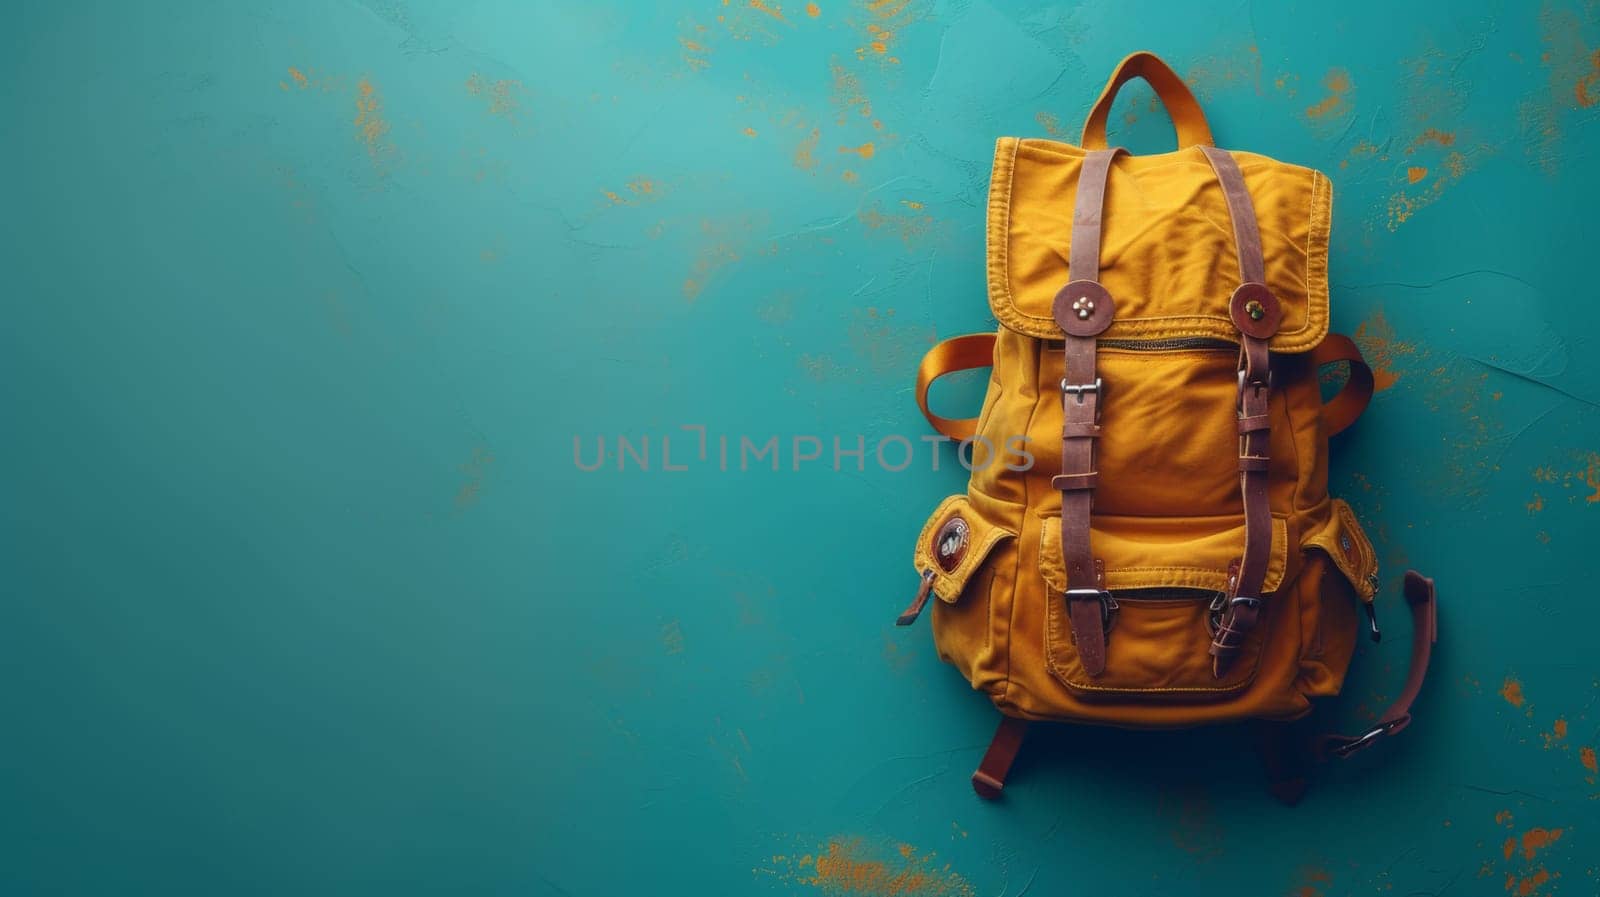 Printed backpack with an airplane on a colored background. Concept for World Tourism Day by Andrei_01